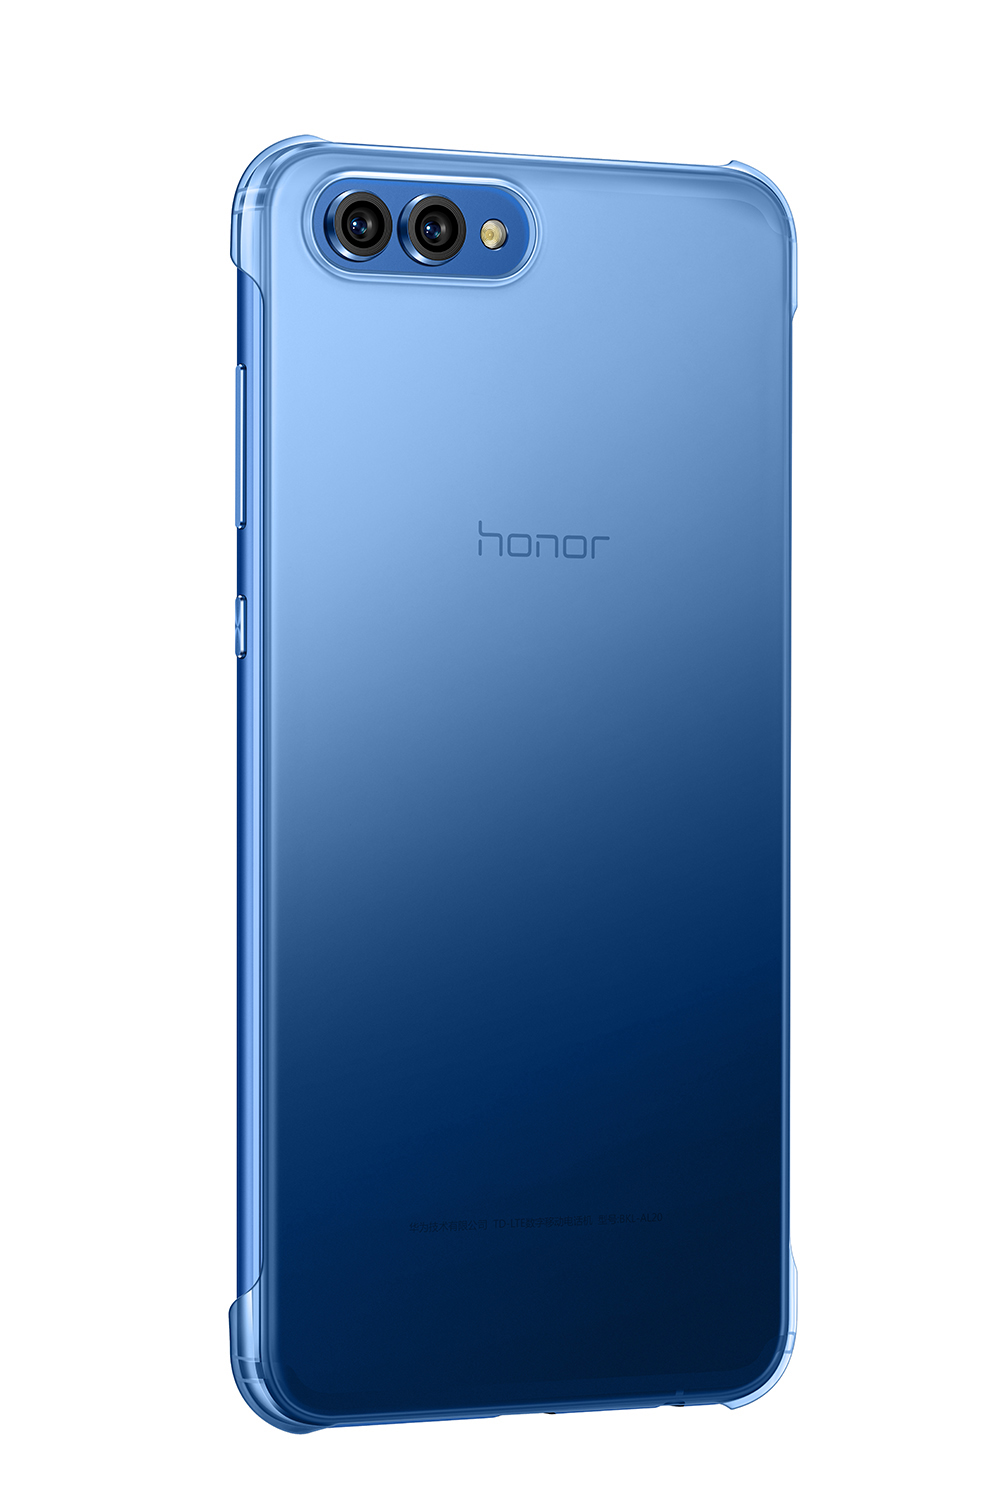 HONOR Magnet, Backcover, Honor, Blau View 10